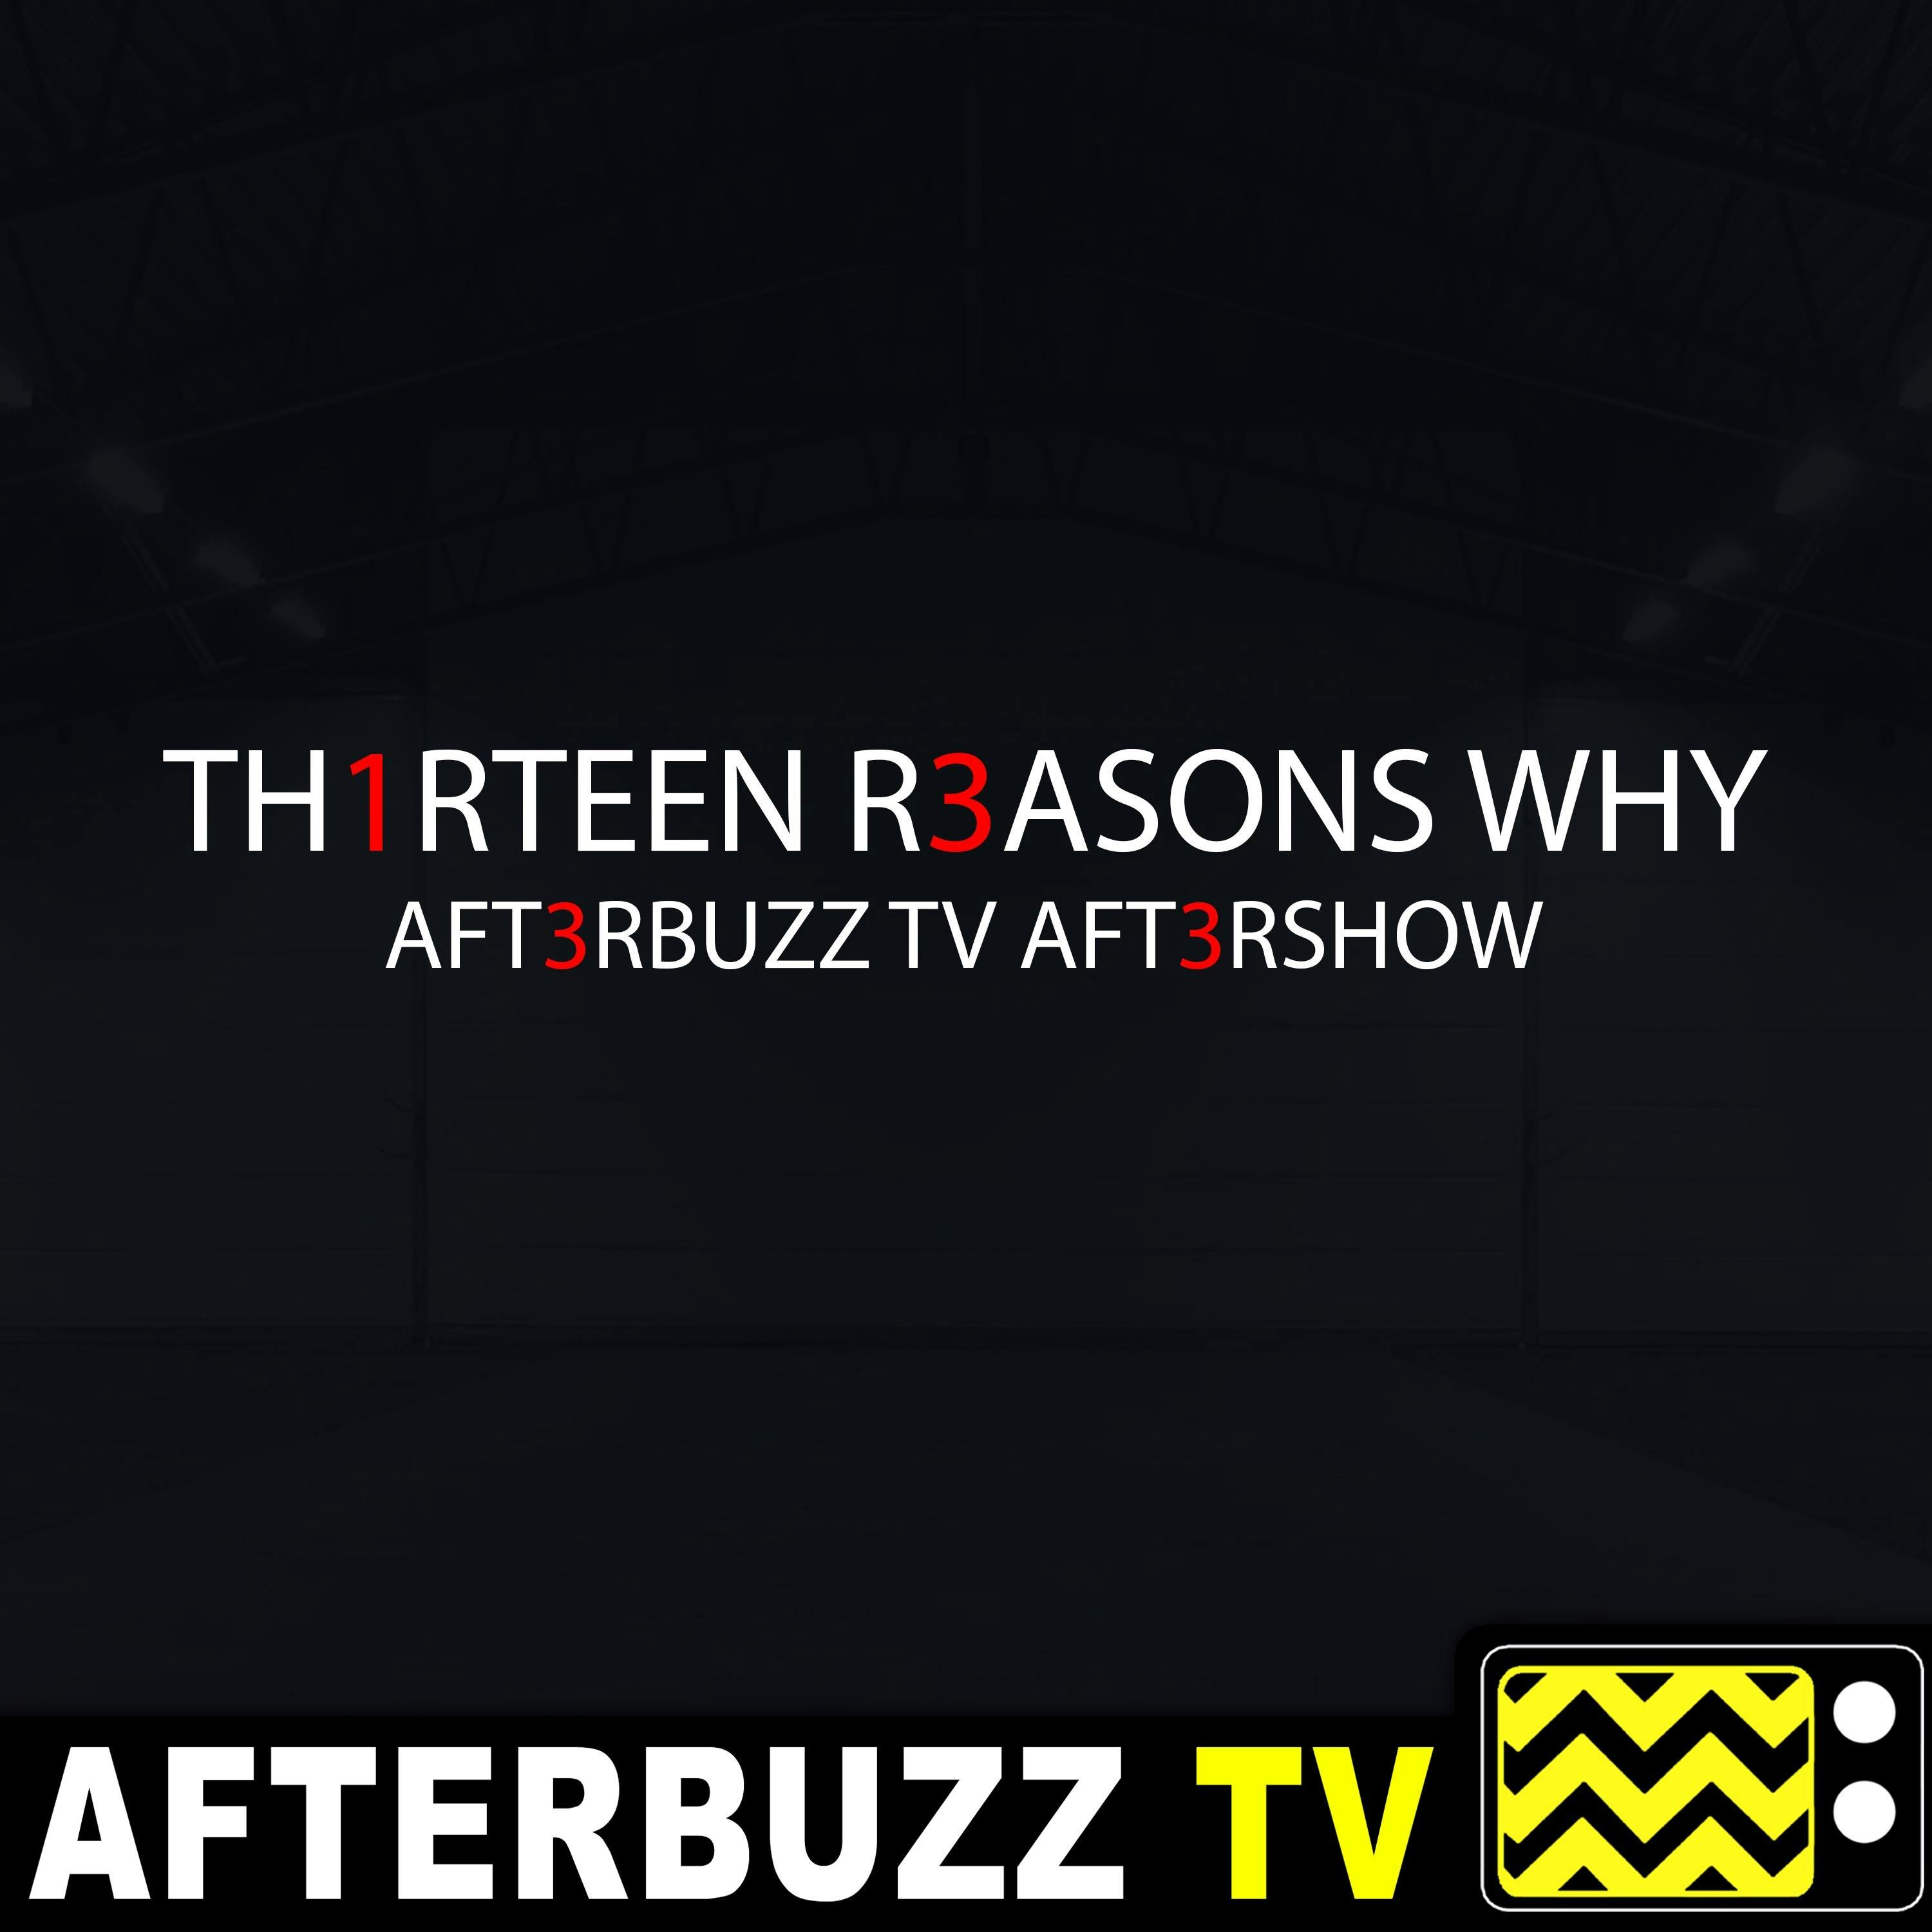 13 Reasons Why S:1 | Keiko Agena Guests on Tape 5, Side A E:9 | AfterBuzz TV AfterShow